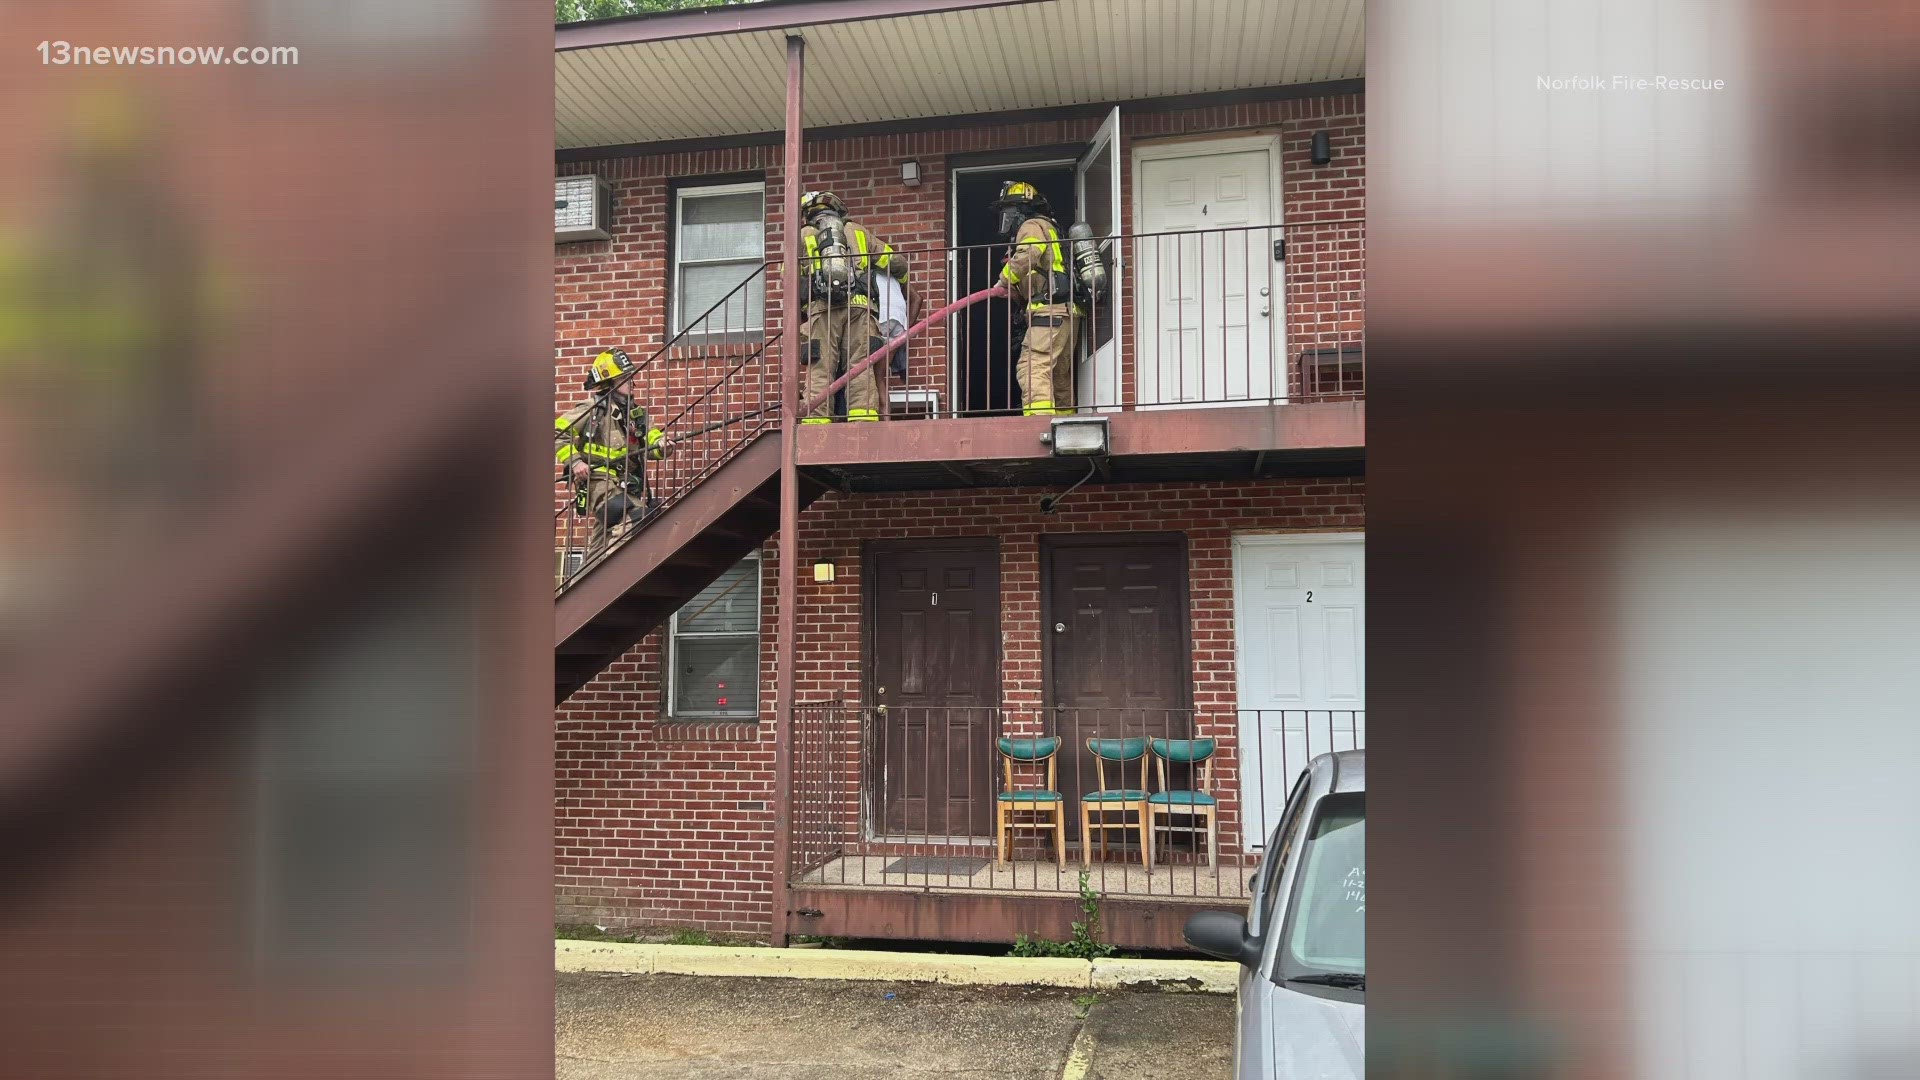 When crews got to the four-unit apartment complex, they found a kitchen fire. One person was taken to the hospital for smoke inhalation.